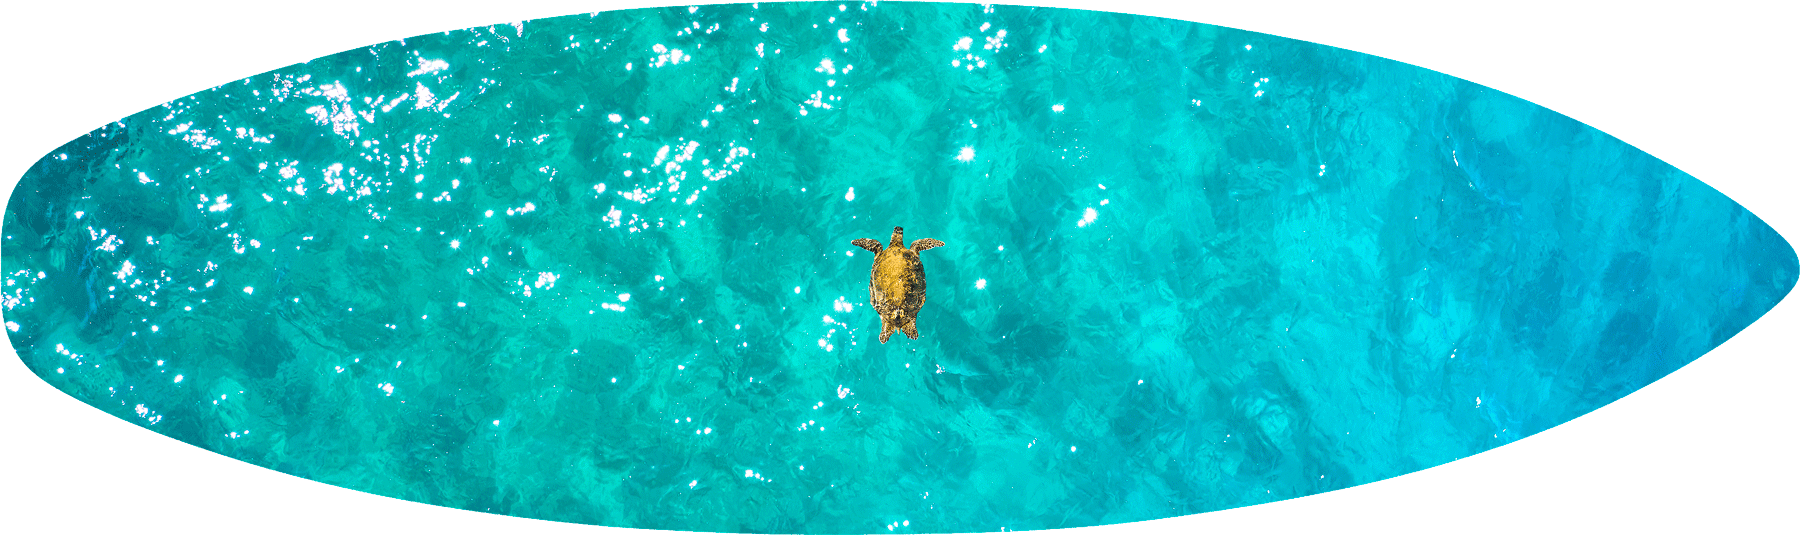 A lone Honu (Hawaiian Green Sea Turtle) I came across in the middle of crystal clear turquoise Maui waters. So peaceful to observe...